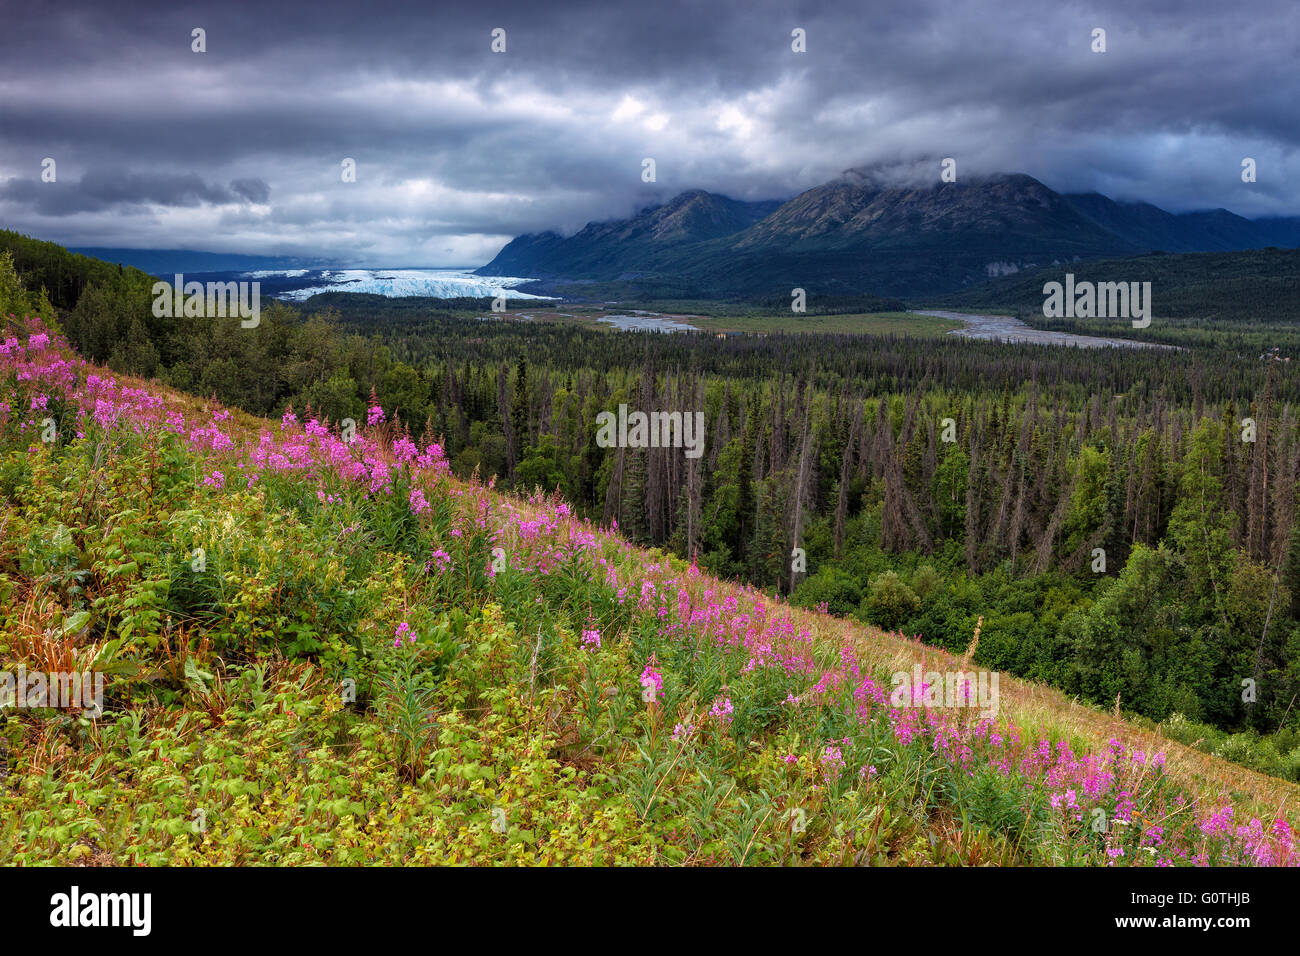 A Matanuska Valley view with some fireweed in the foreground and the Matabuska Glacier in the background. Alaska, USA. Stock Photo